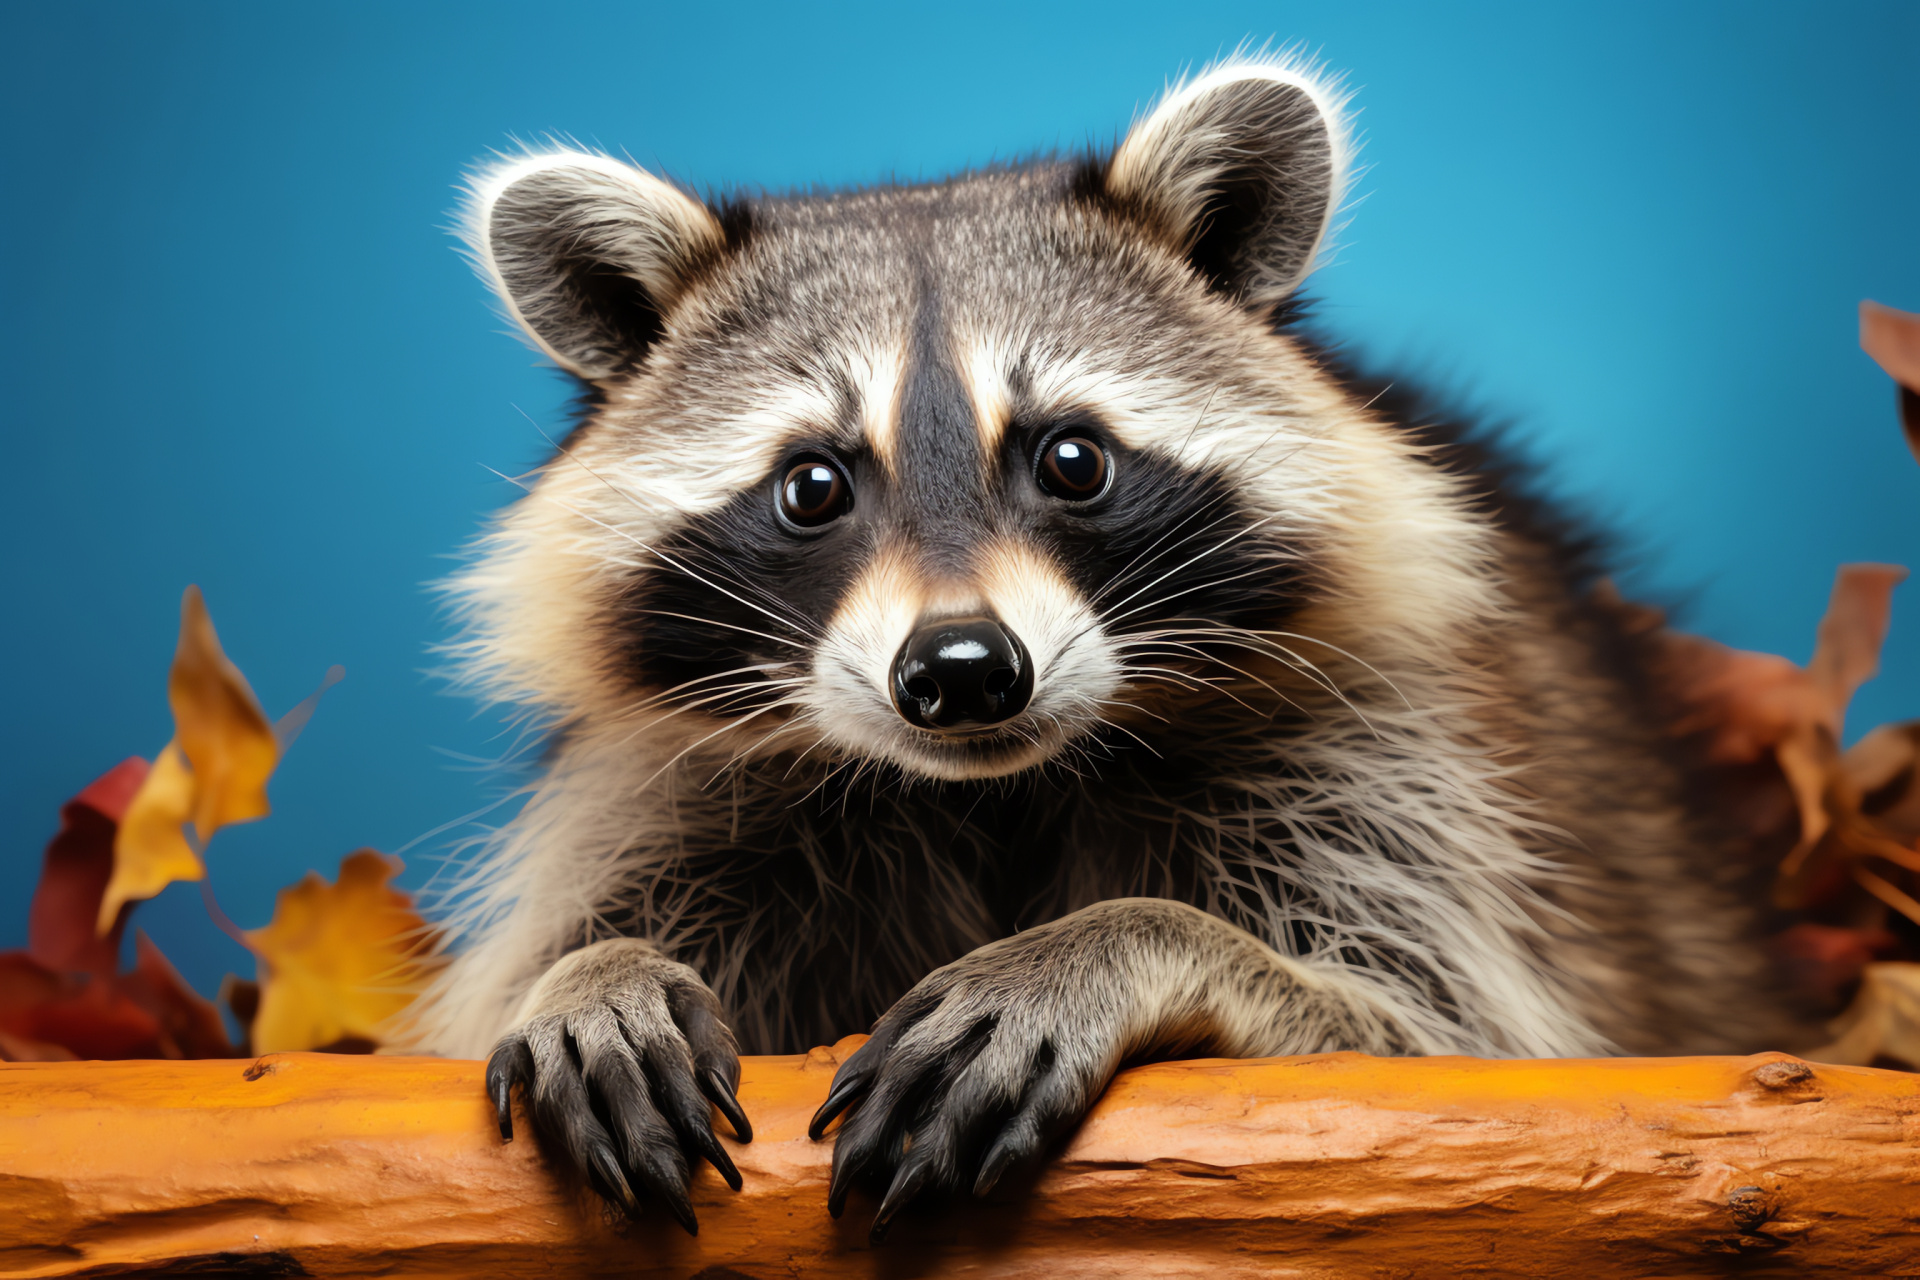 Raccoon, tranquil pose, contrasting shades, fluffy appearance, varicolored setting, HD Desktop Image